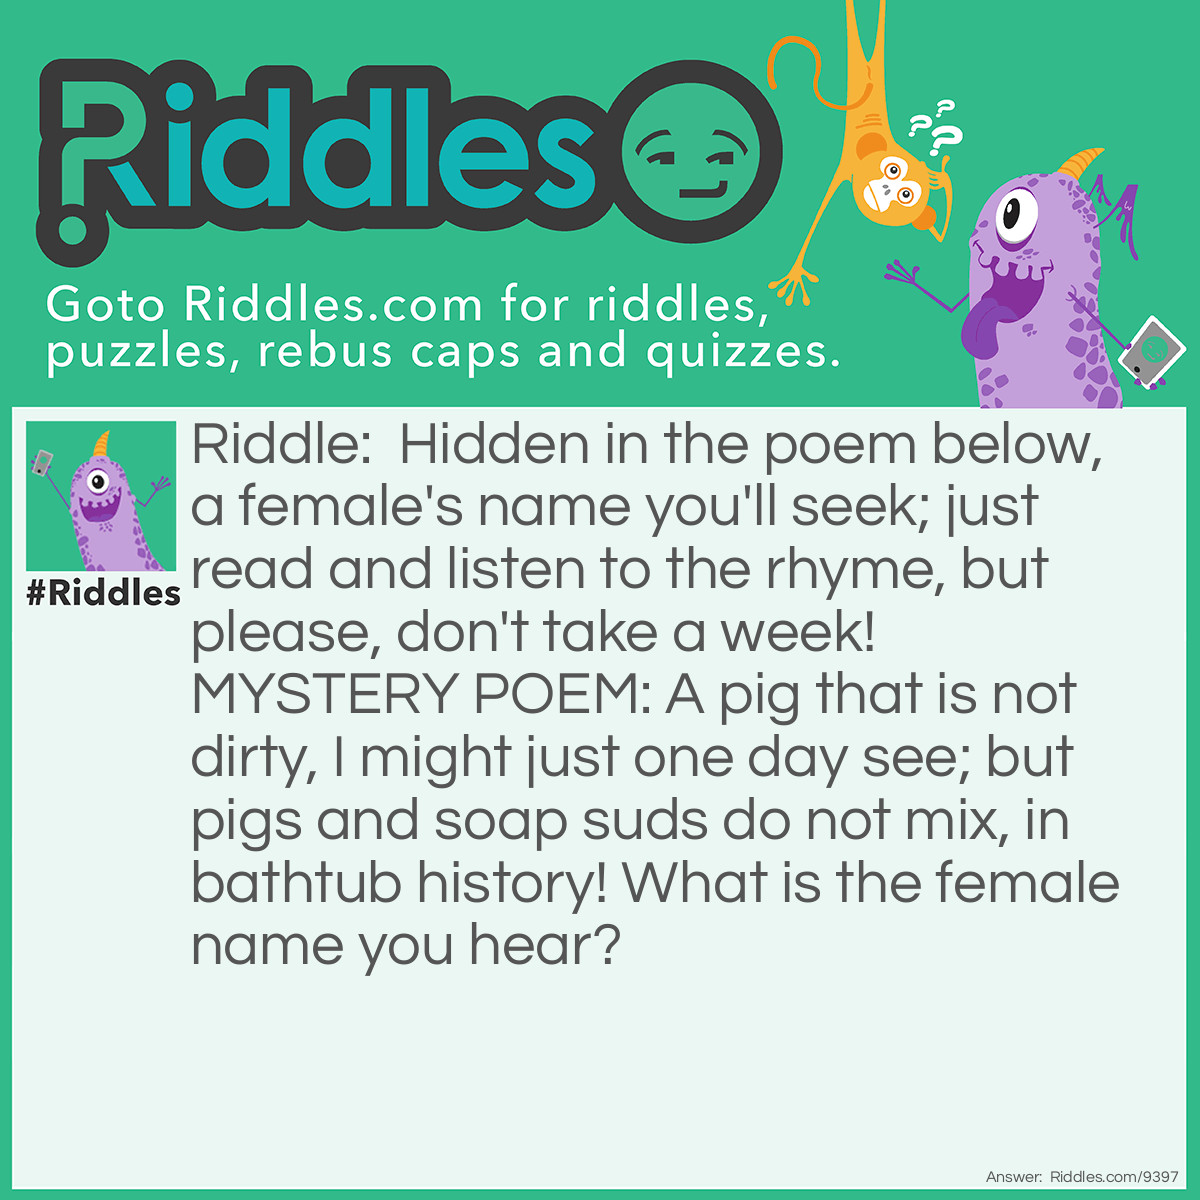 Riddle: Hidden in the poem below, a female's name you'll seek; just read and listen to the rhyme, but please, don't take a week! MYSTERY POEM: A pig that is not dirty, I might just one day see; but pigs and soap suds do not mix, in bathtub history! What is the female name you hear? Answer: DAISY.